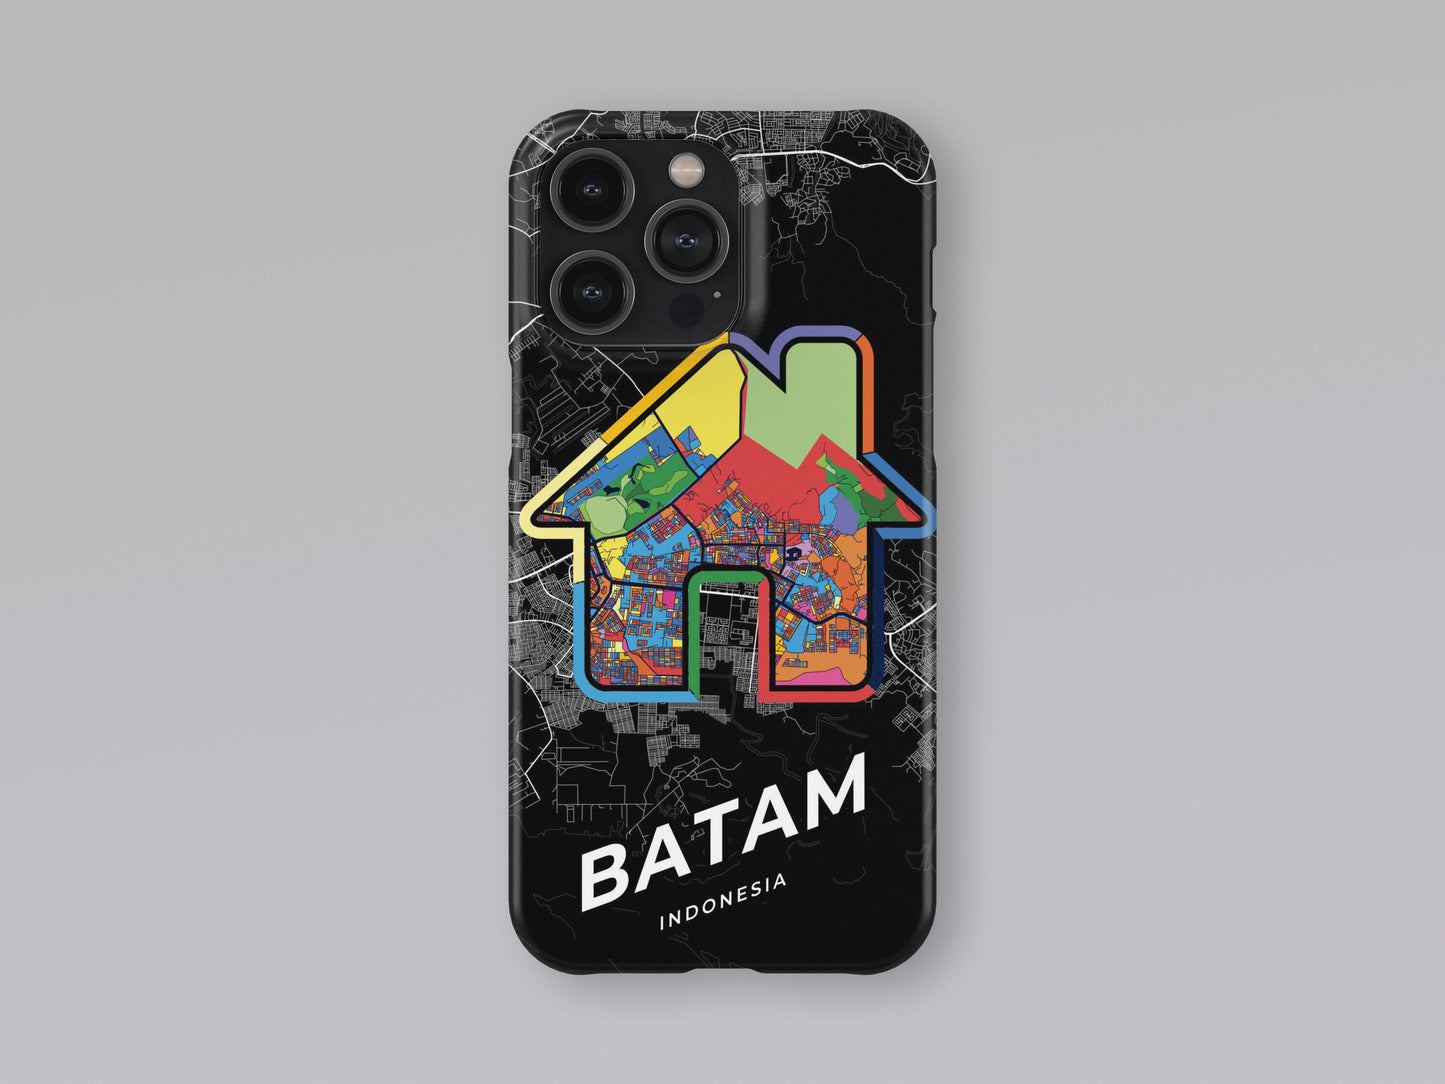 Batam Indonesia slim phone case with colorful icon. Birthday, wedding or housewarming gift. Couple match cases. 3